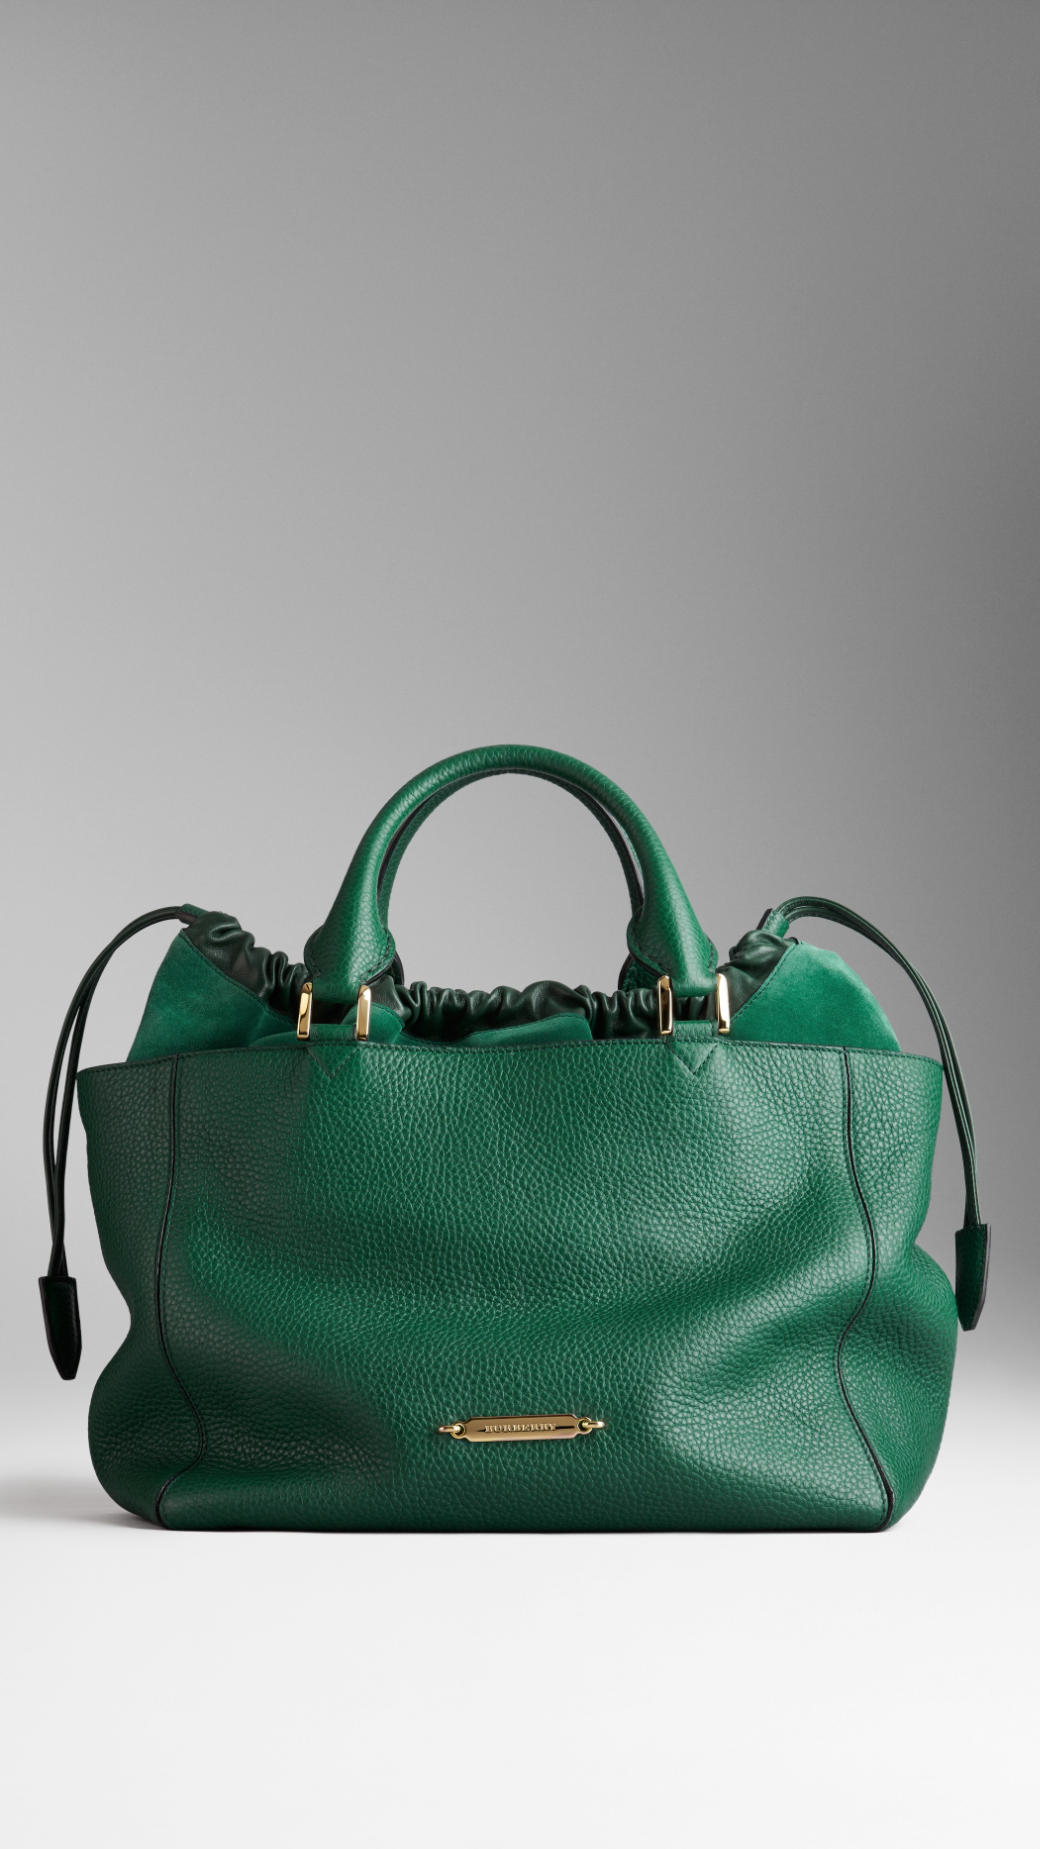 Burberry Medium Grainy Leather Tote Bag in Green | Lyst